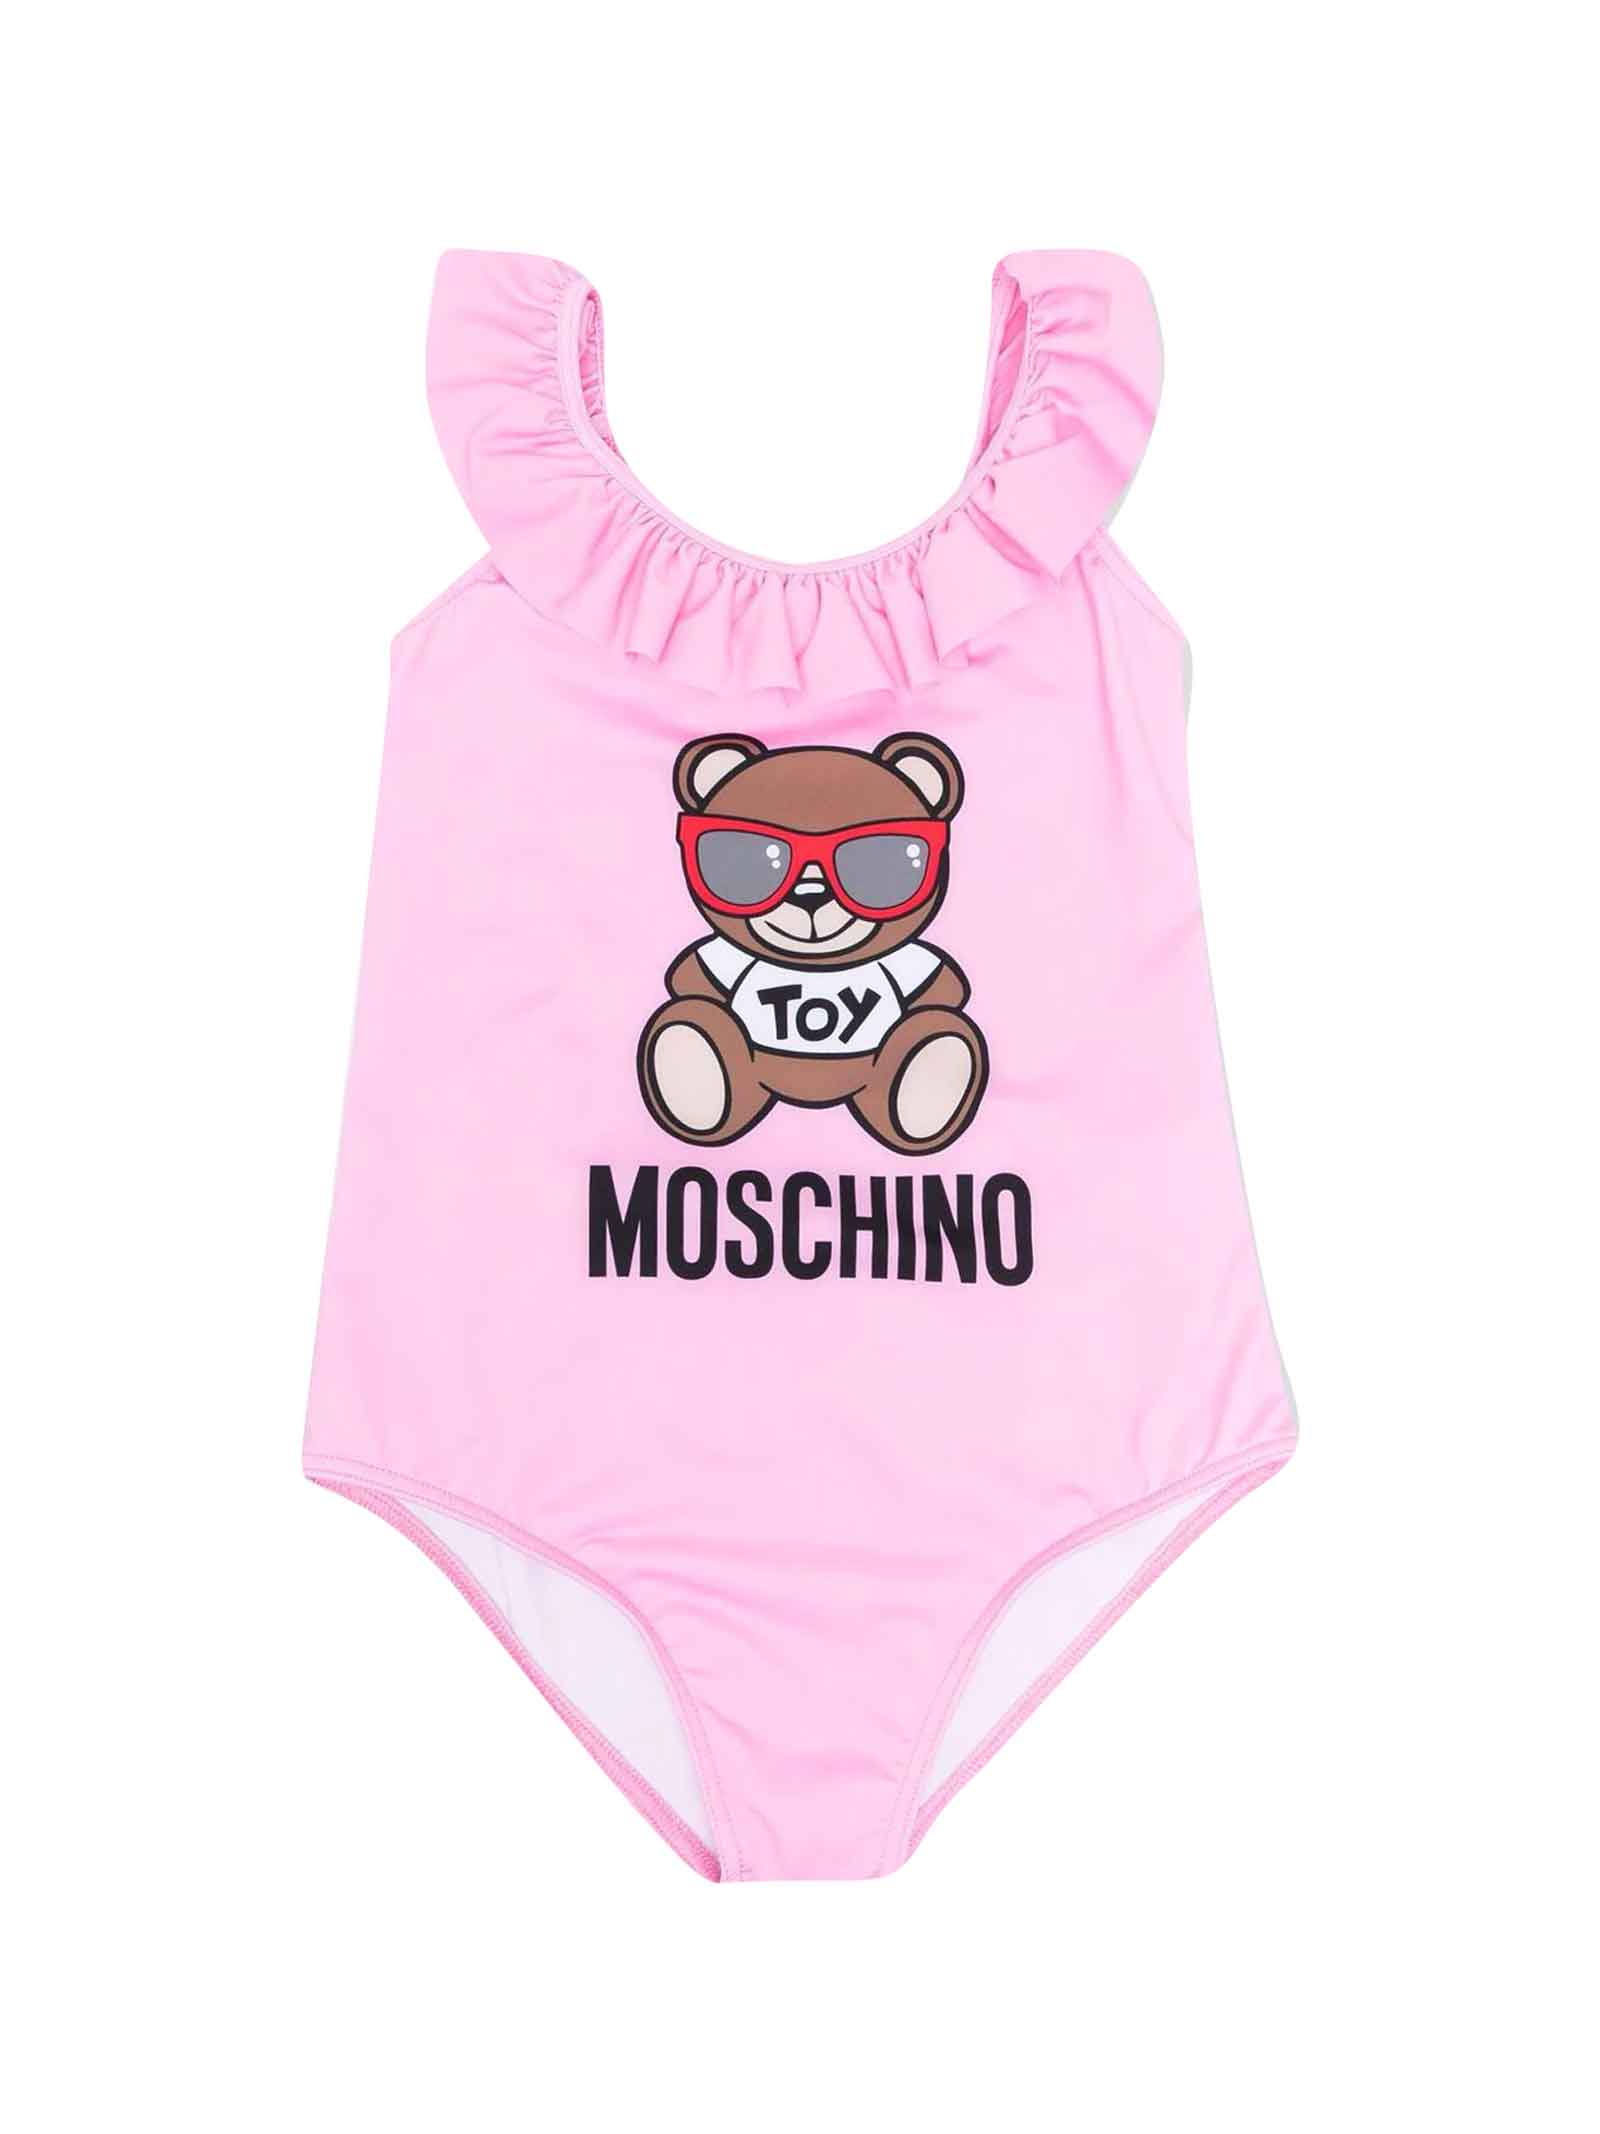 Moschino Pink Baby Girl One-piece Swimsuit